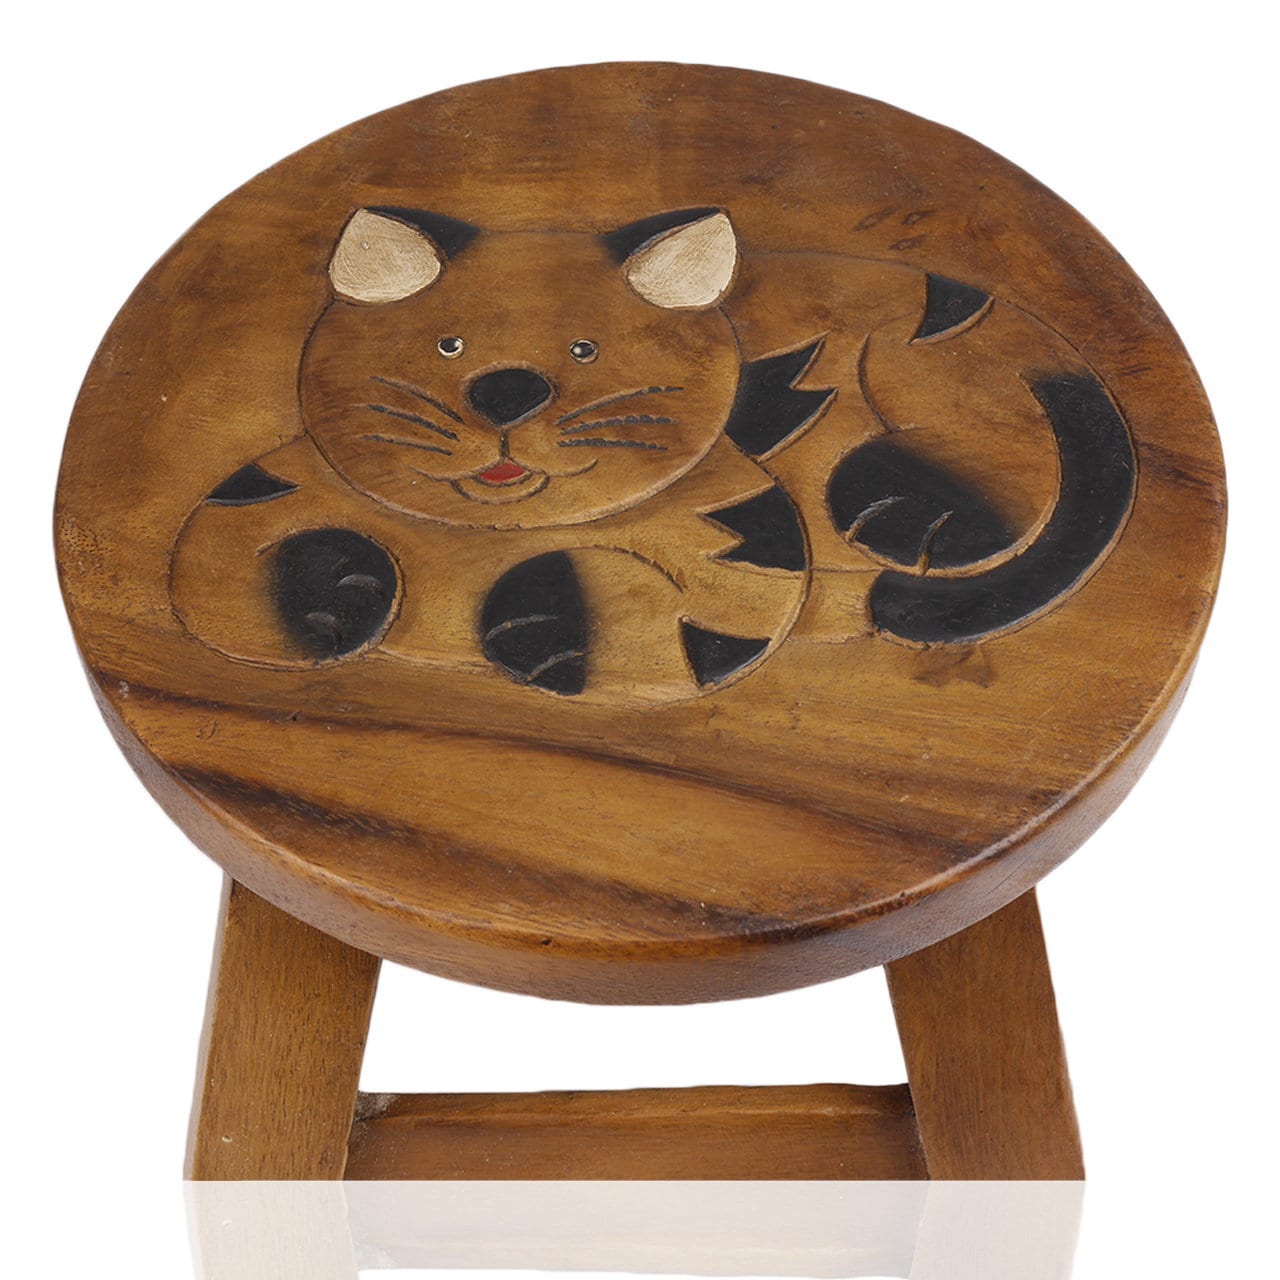 Children's stool wooden stool with animal motif cat lying down painted and carved height 25 cm